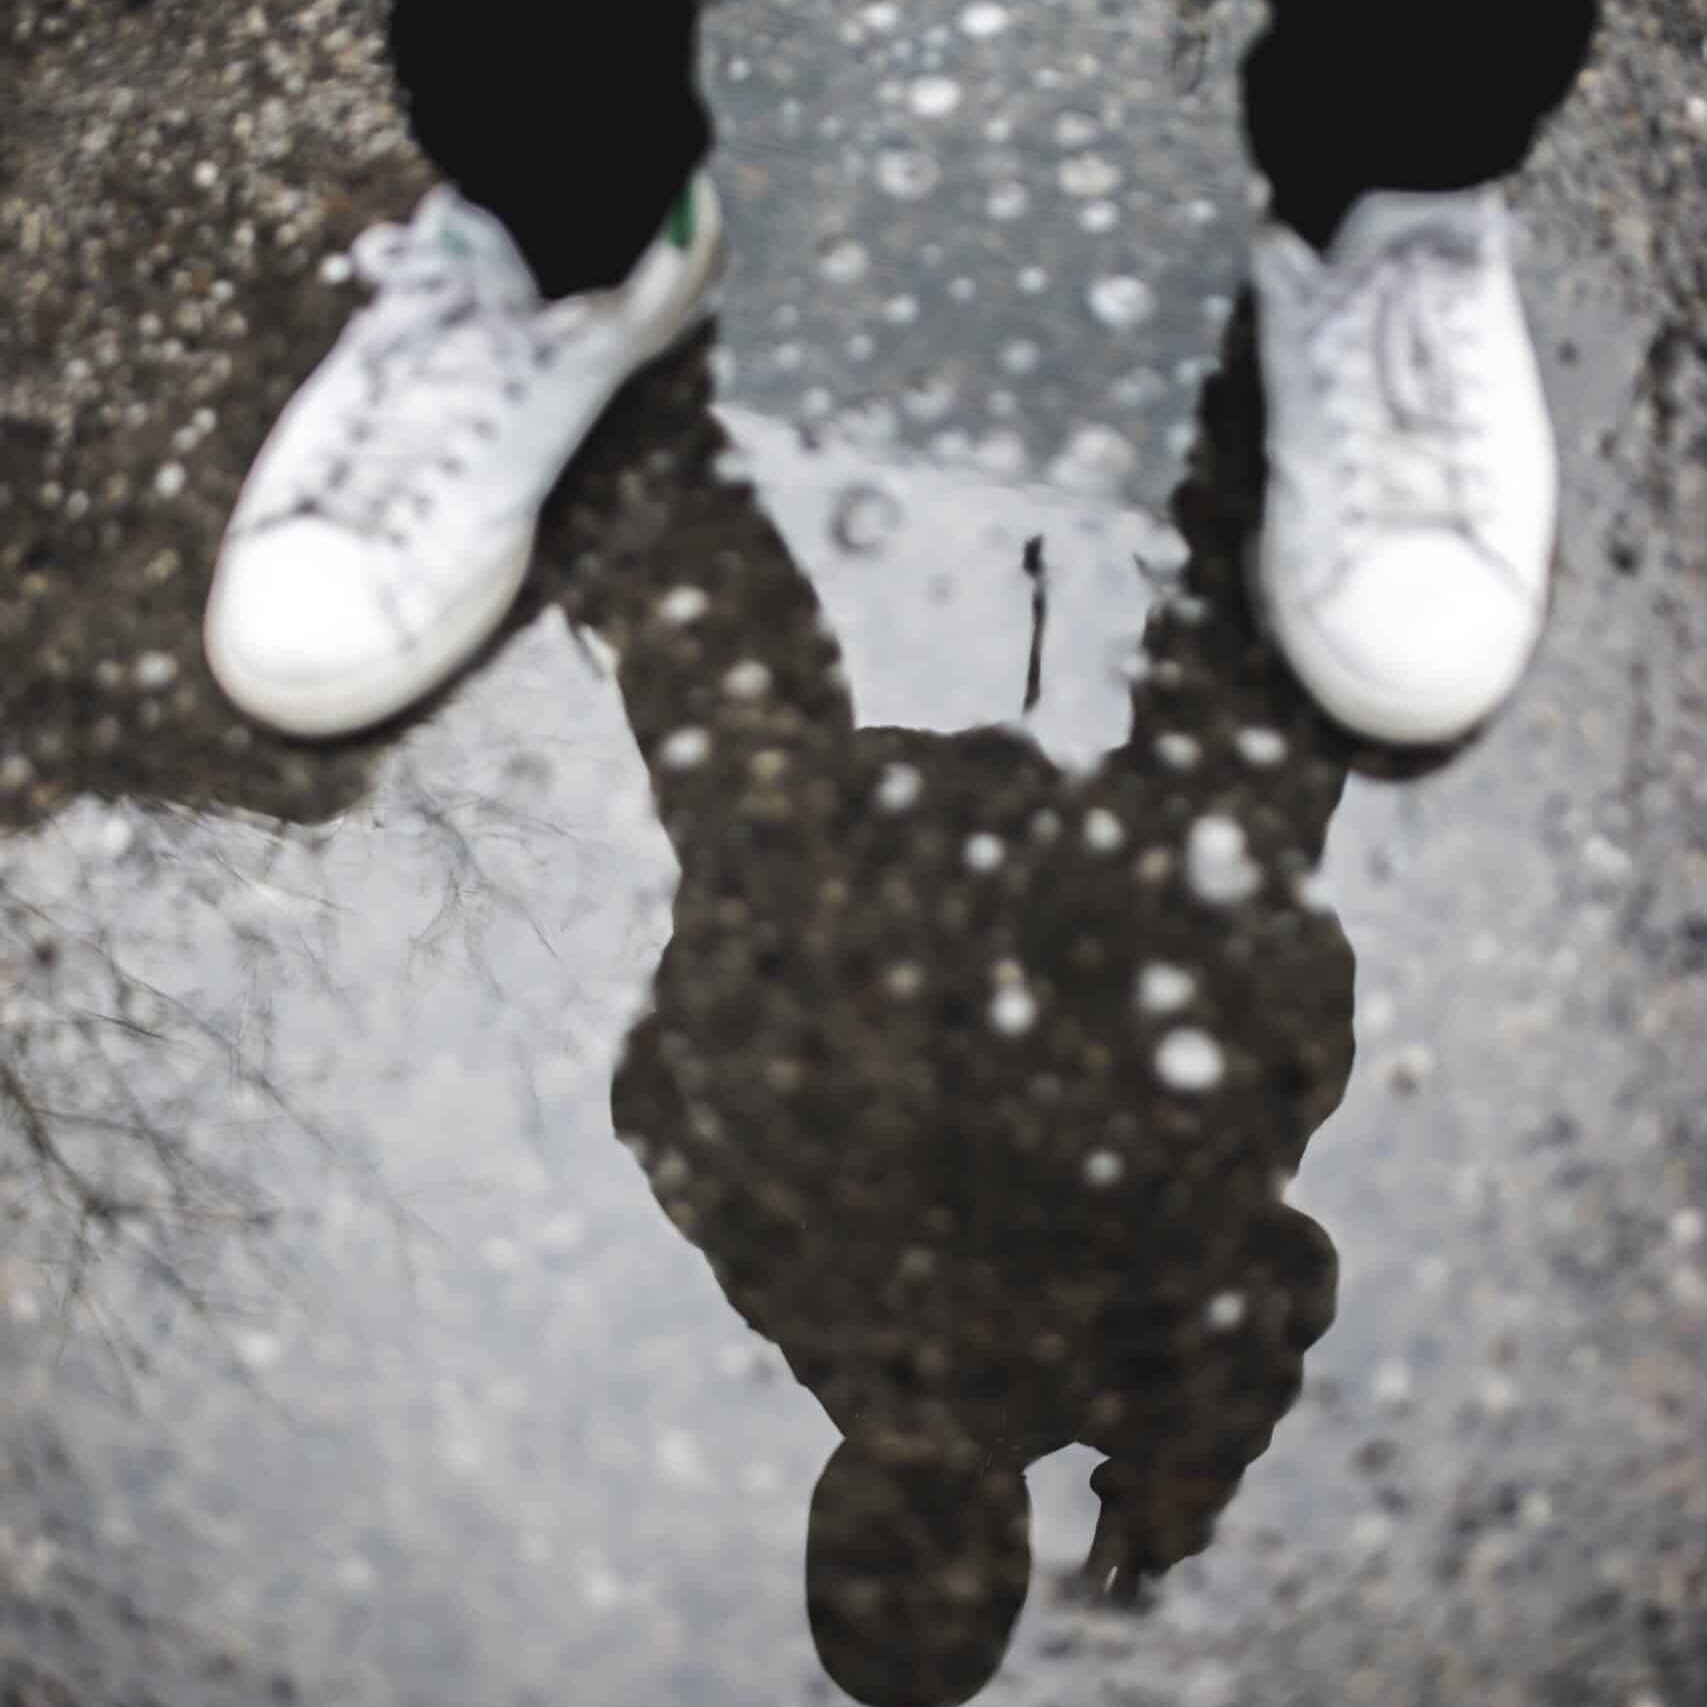 a person's reflection shows in a puddle